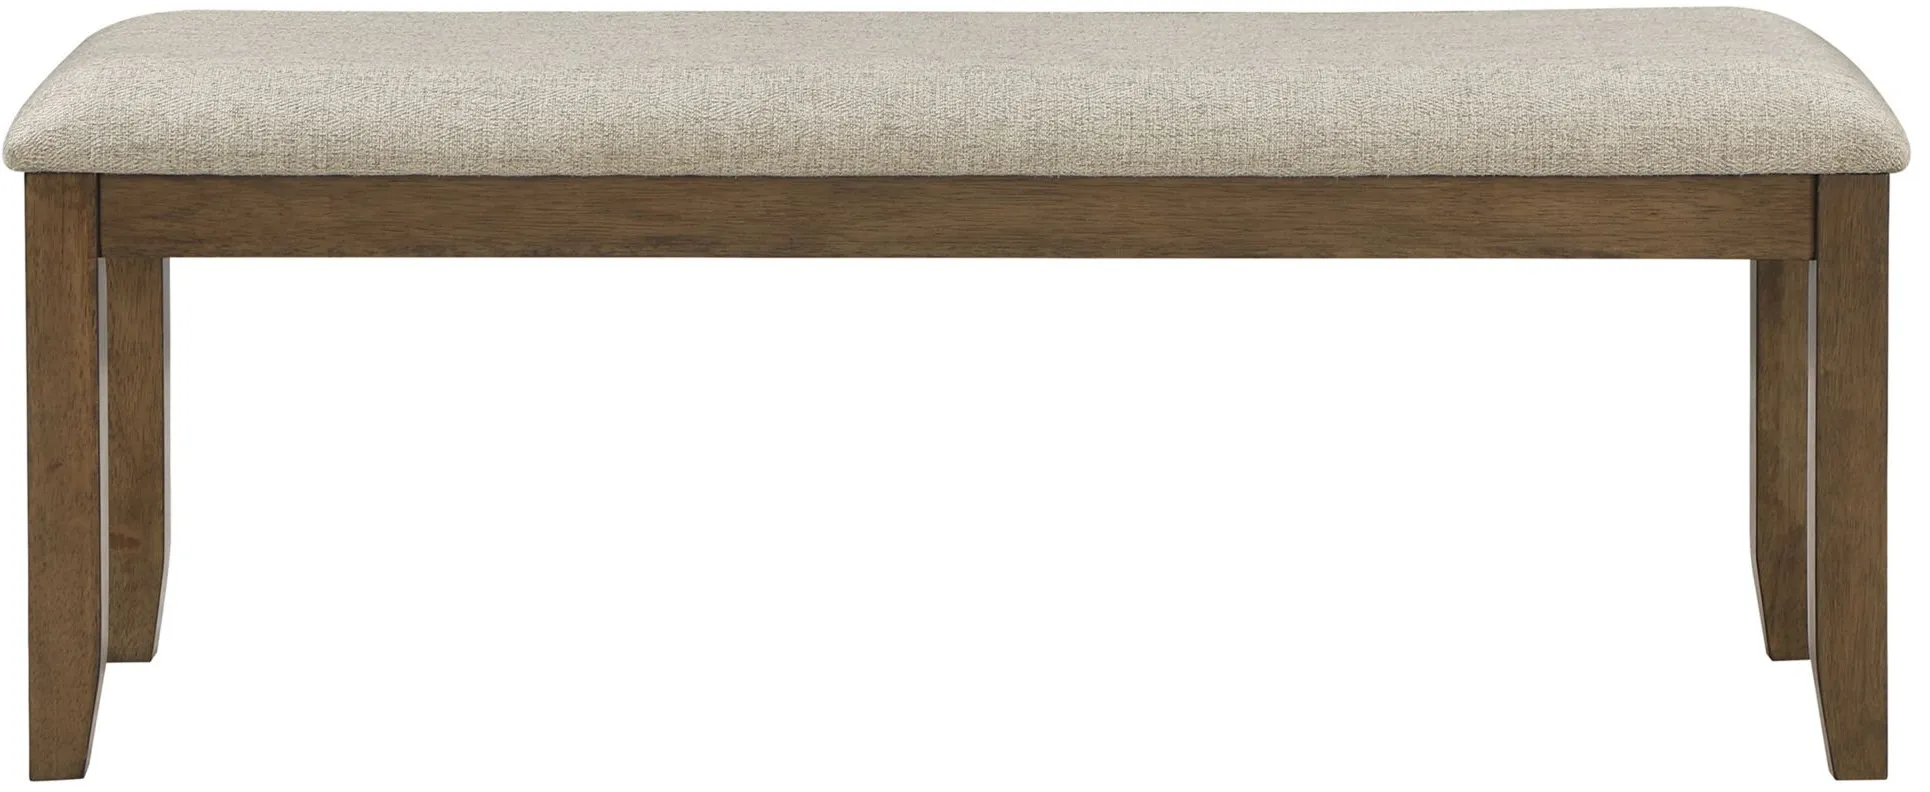 Benton Dining Room Bench in Cherry by Homelegance